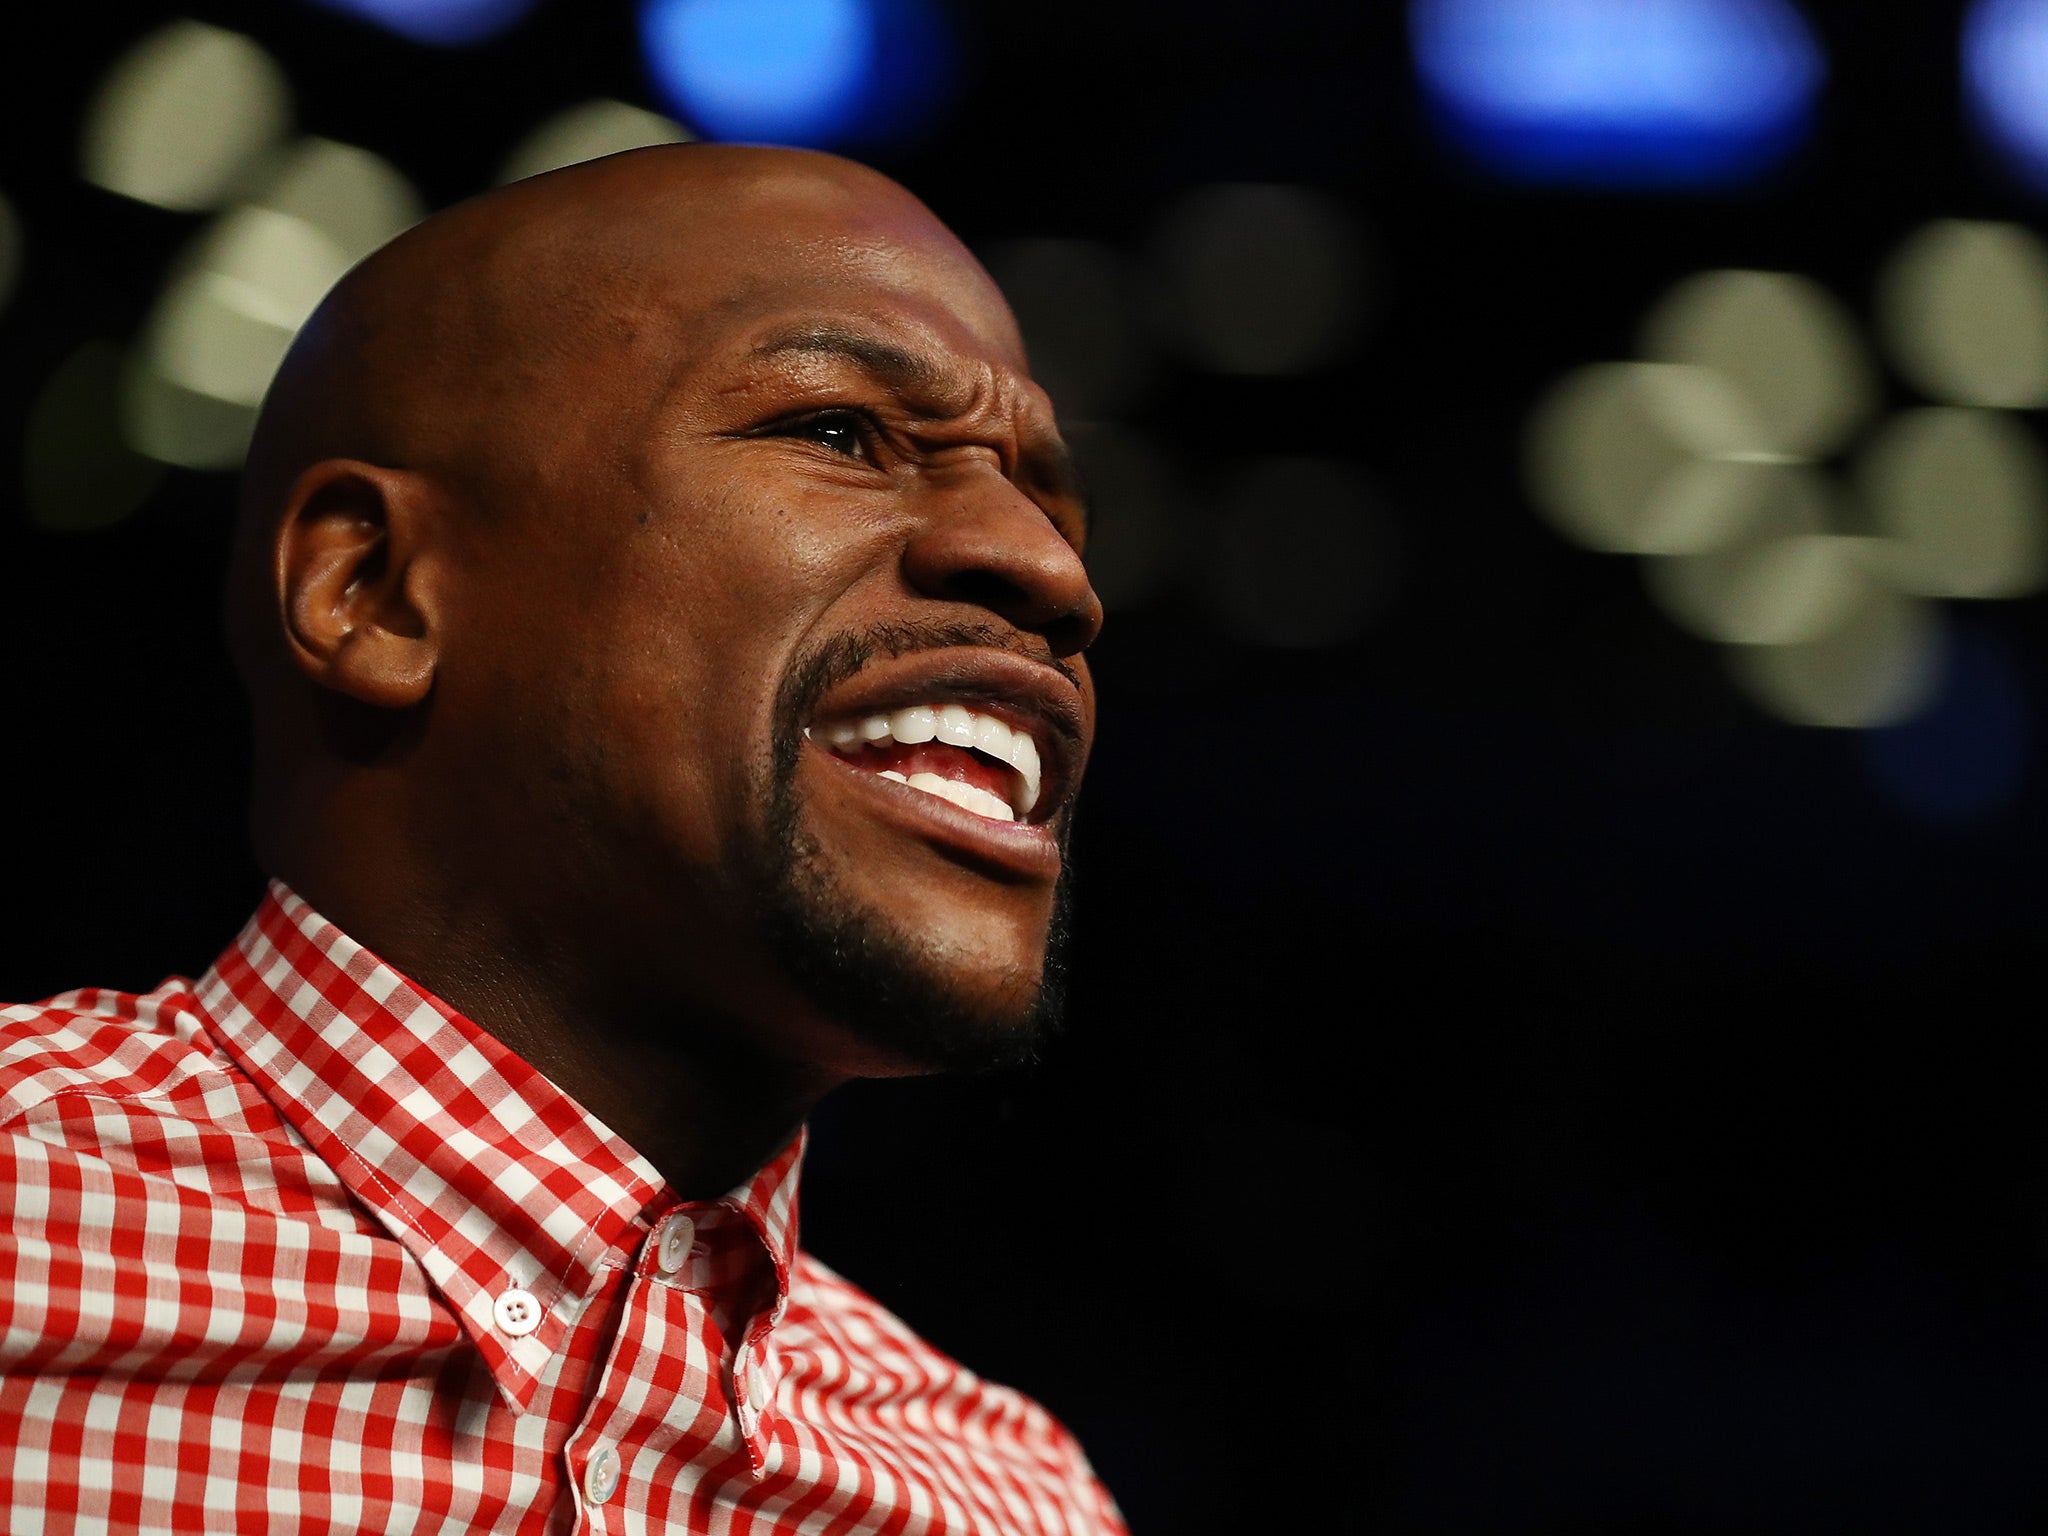 Floyd Mayweather invited Conor McGregor's camp to contact his people, though negotiations are rumoured to have already begun